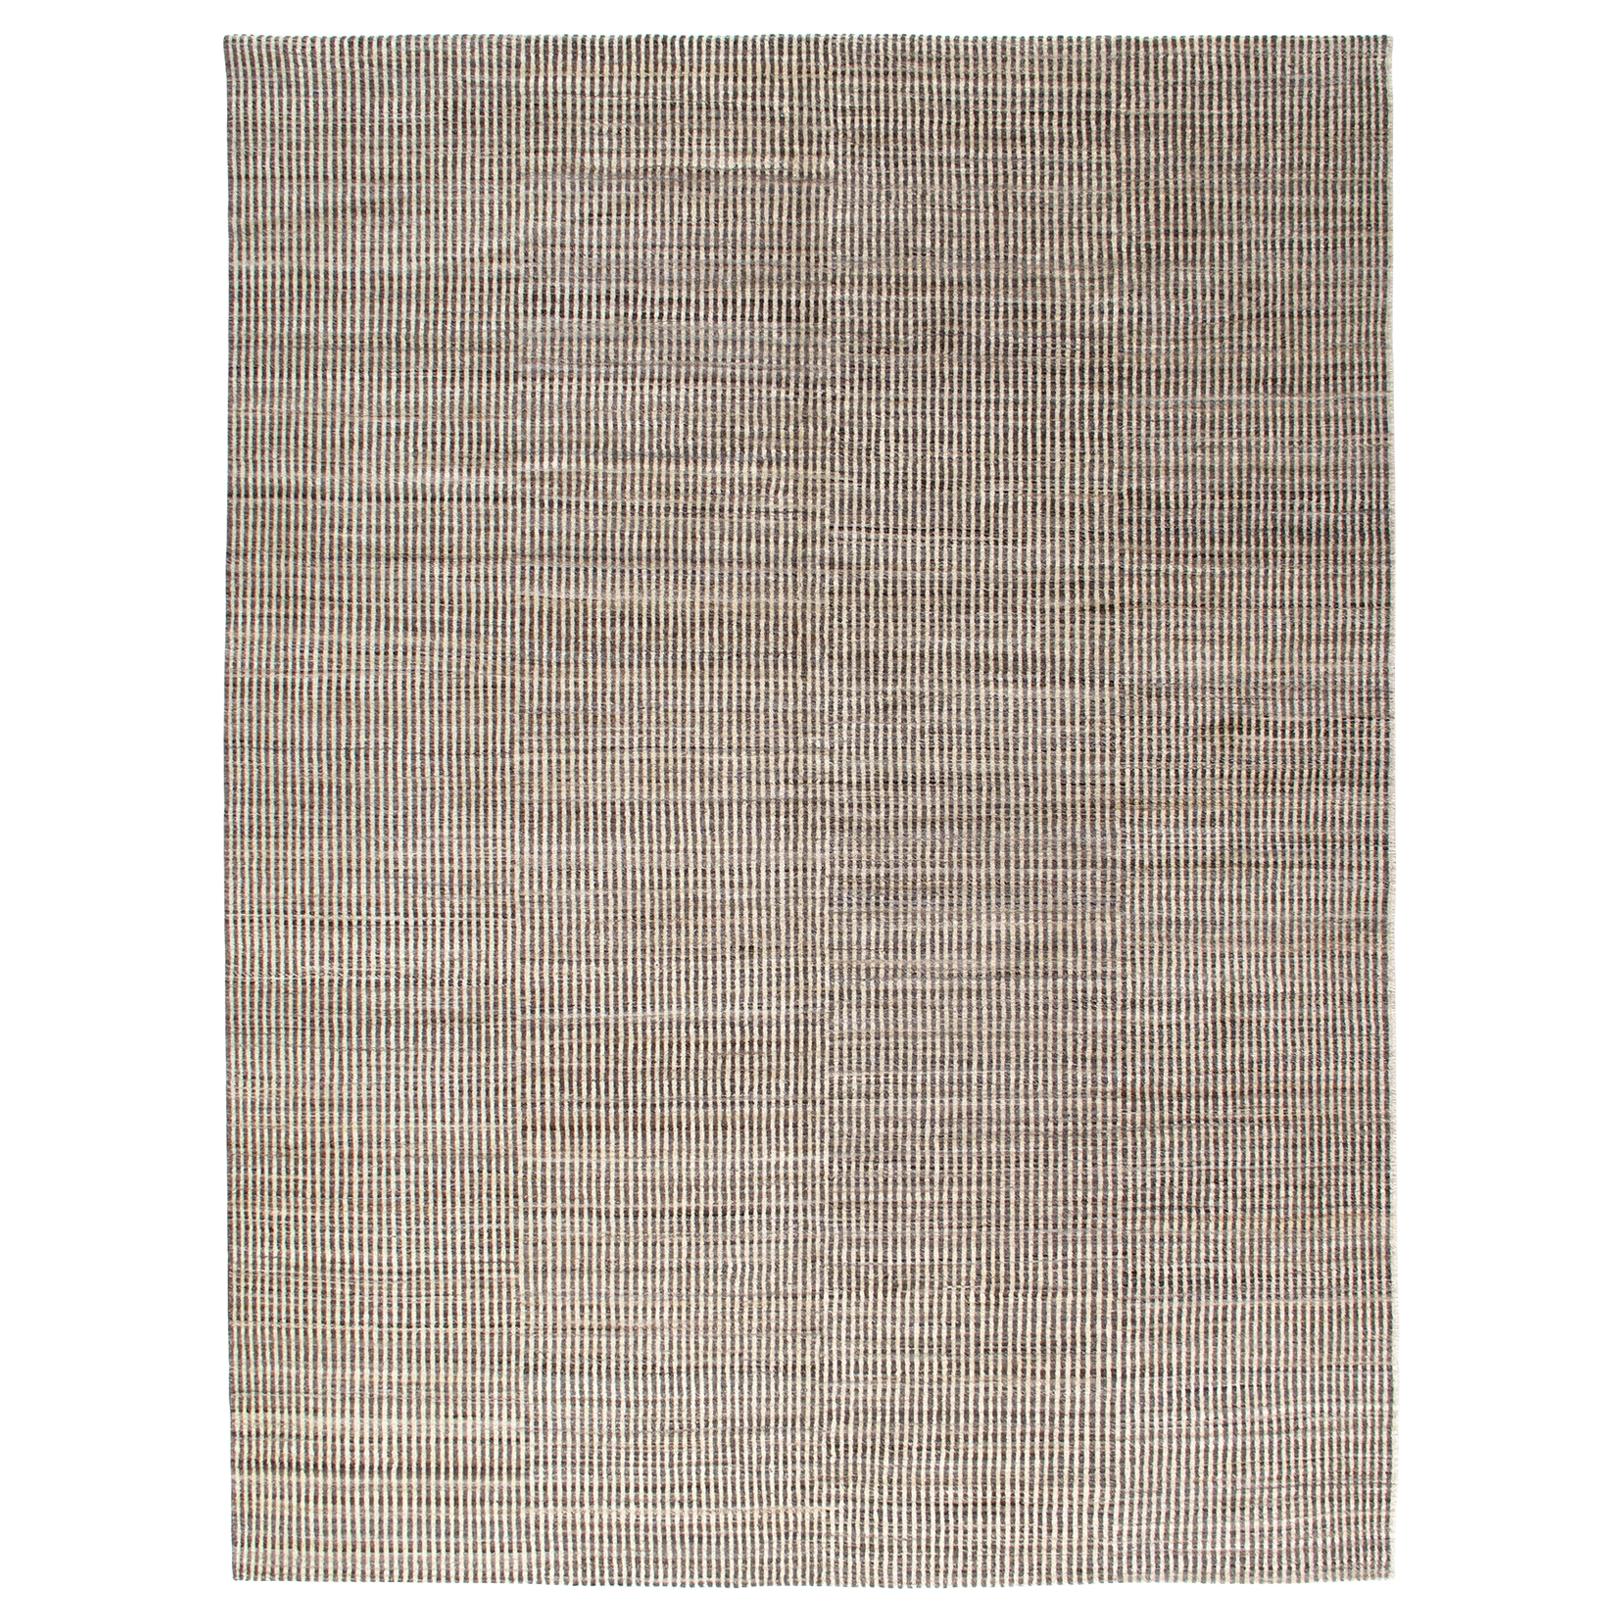 Modern Persian Shiraz Hand Knotted Rug in Natural, Beige and Grey Color